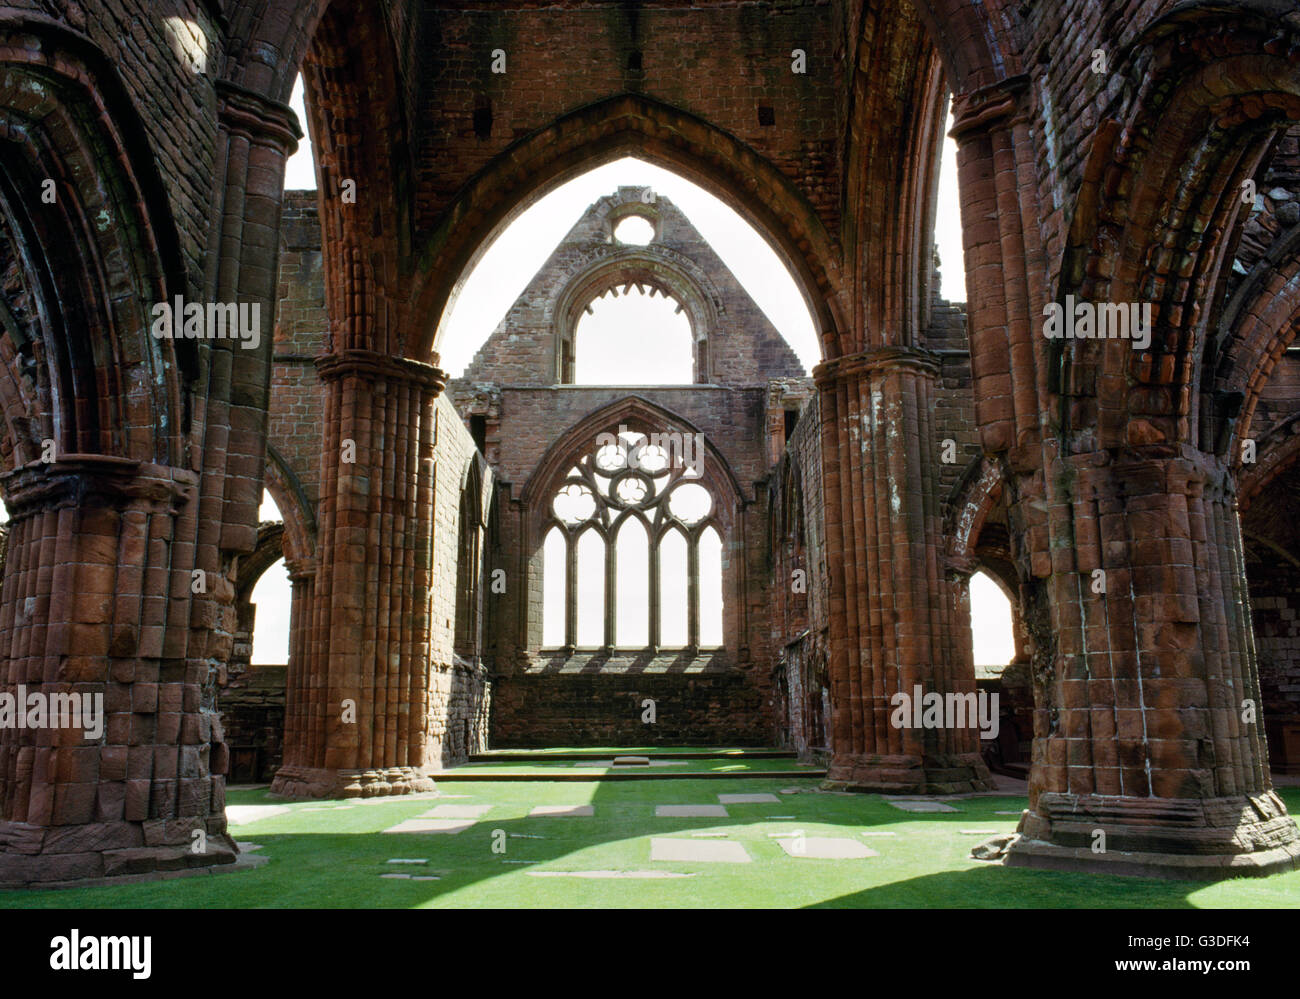 Looking from the nave at the crossing, chancel and east window of Sweetheart Abbey church.Dumfries & galloway, Scotland, UK Stock Photo